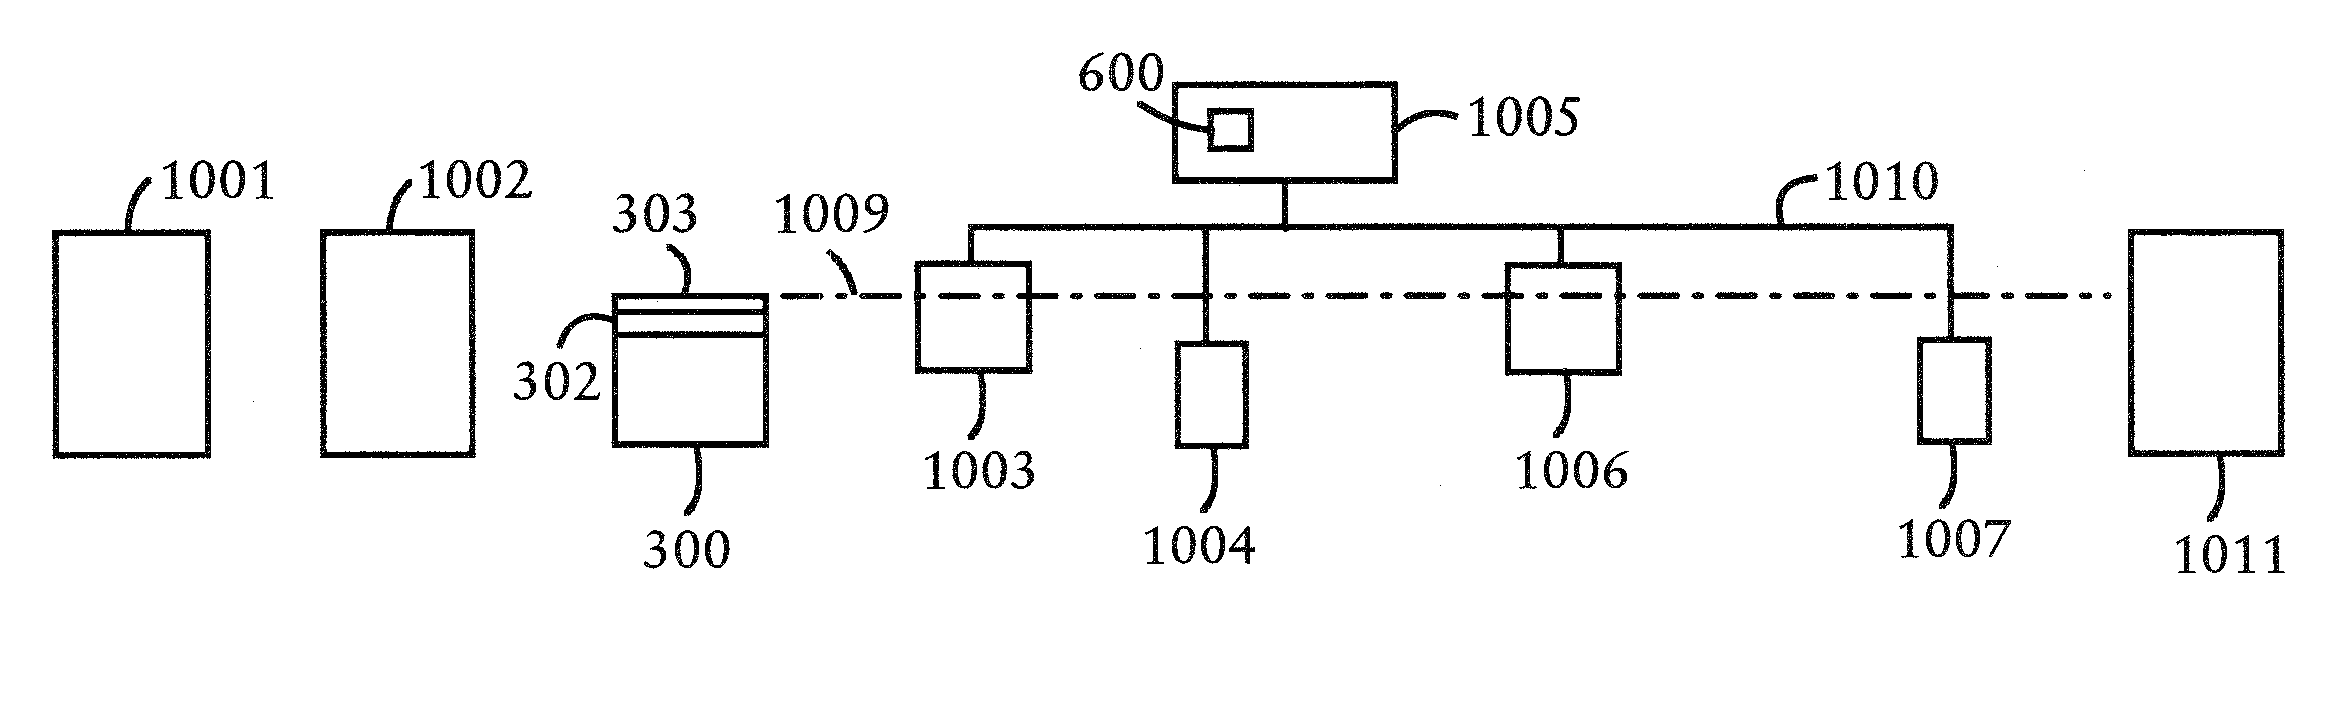 Method of packaging financial transaction instruments, particularly stored value cards